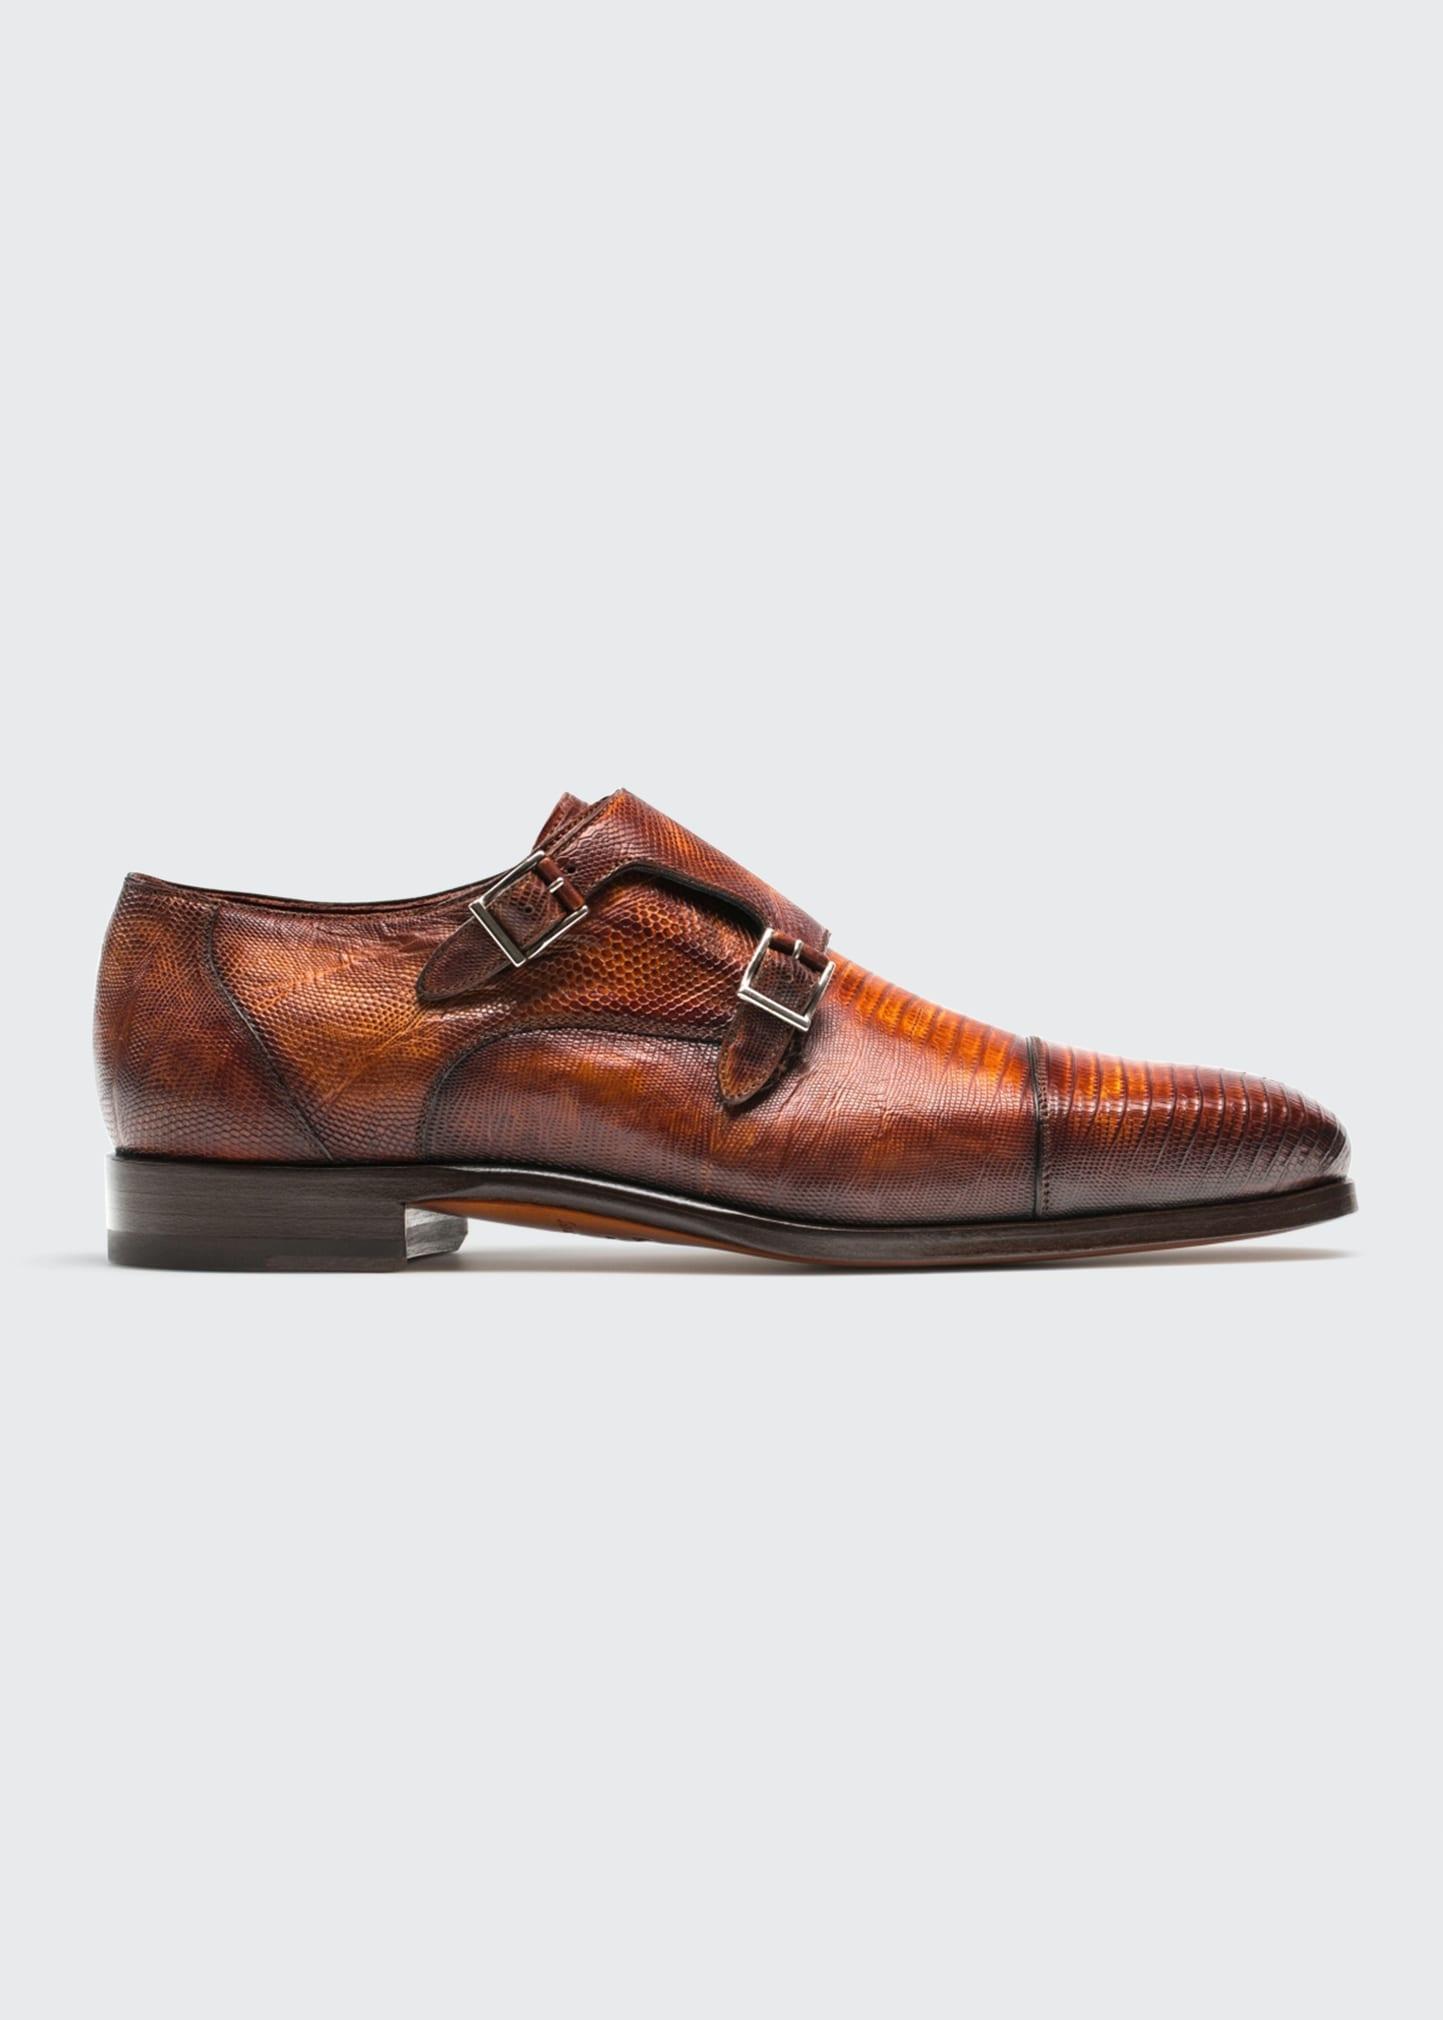 Magnanni Isaac Lizard Double-monk Loafers in Brown for Men | Lyst